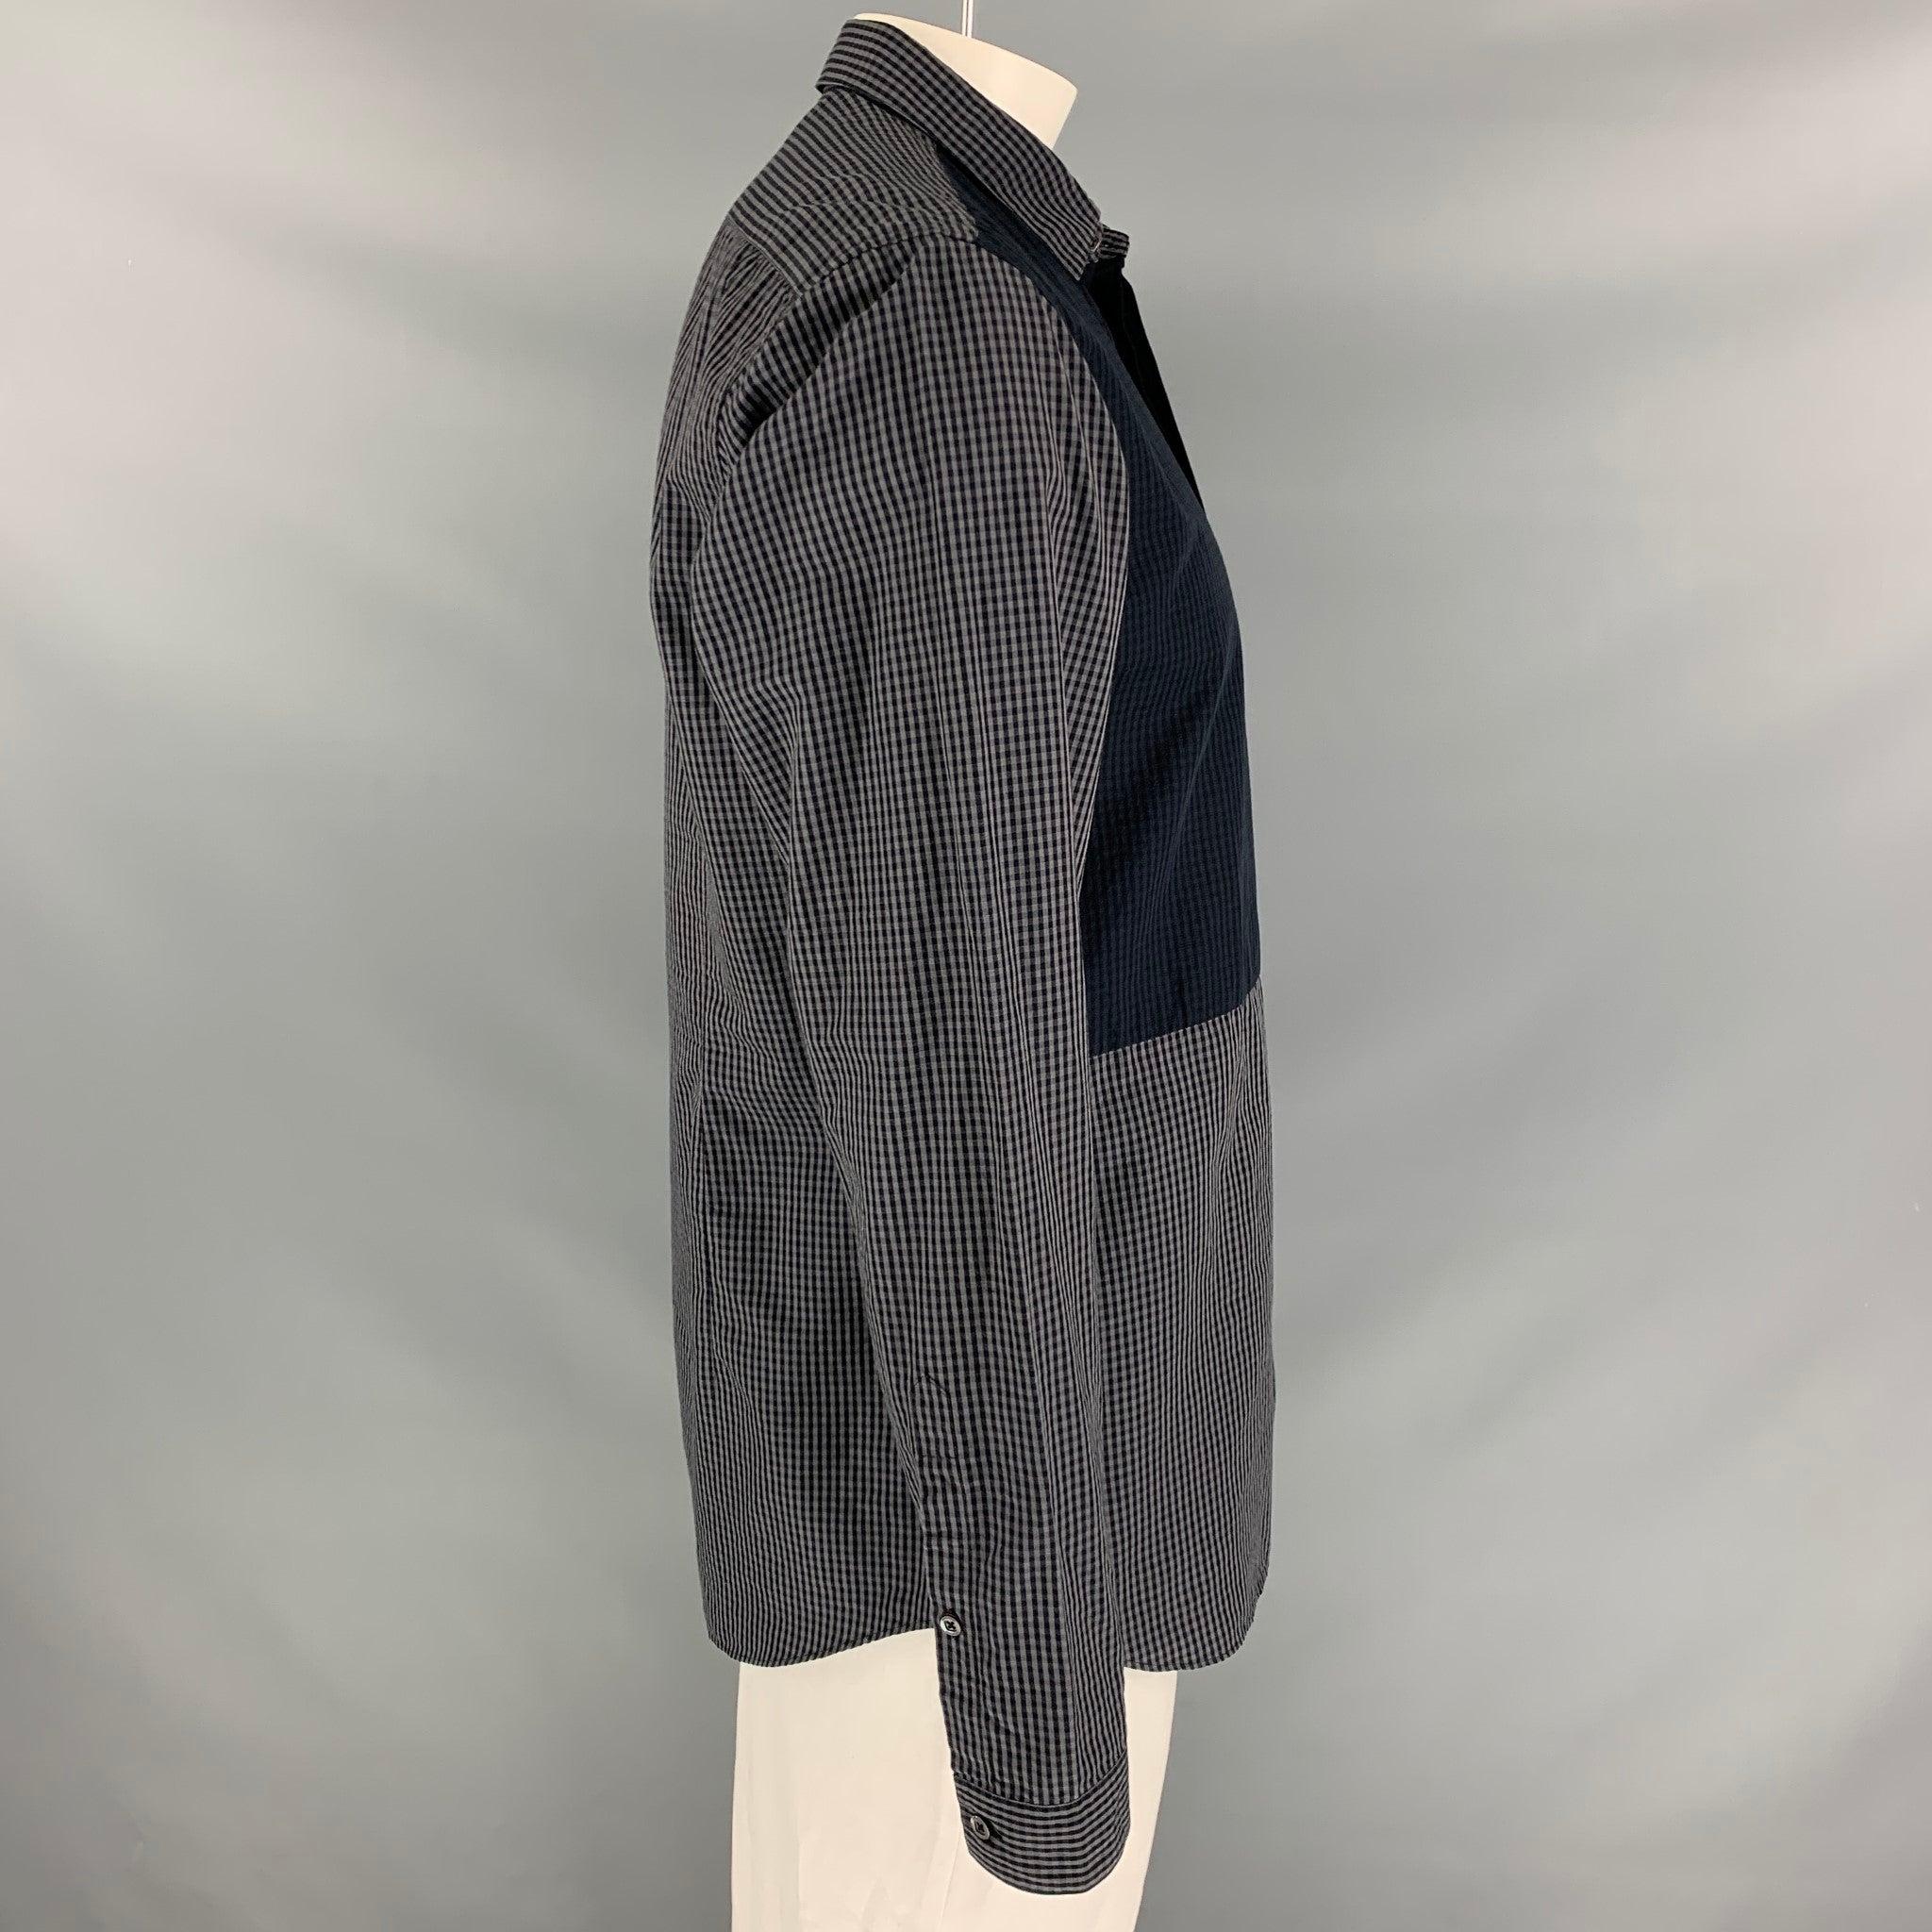 BURBERRY PRORSUM long sleeve shirt comes in a grey gingham silk / cotton featuring a spread collar and a hidden button closure. Made in Italy.Very Good
Pre-Owned Condition. 

Marked:   43/17 

Measurements: 
 
Shoulder: 19.5 inches  Chest: 44 inches